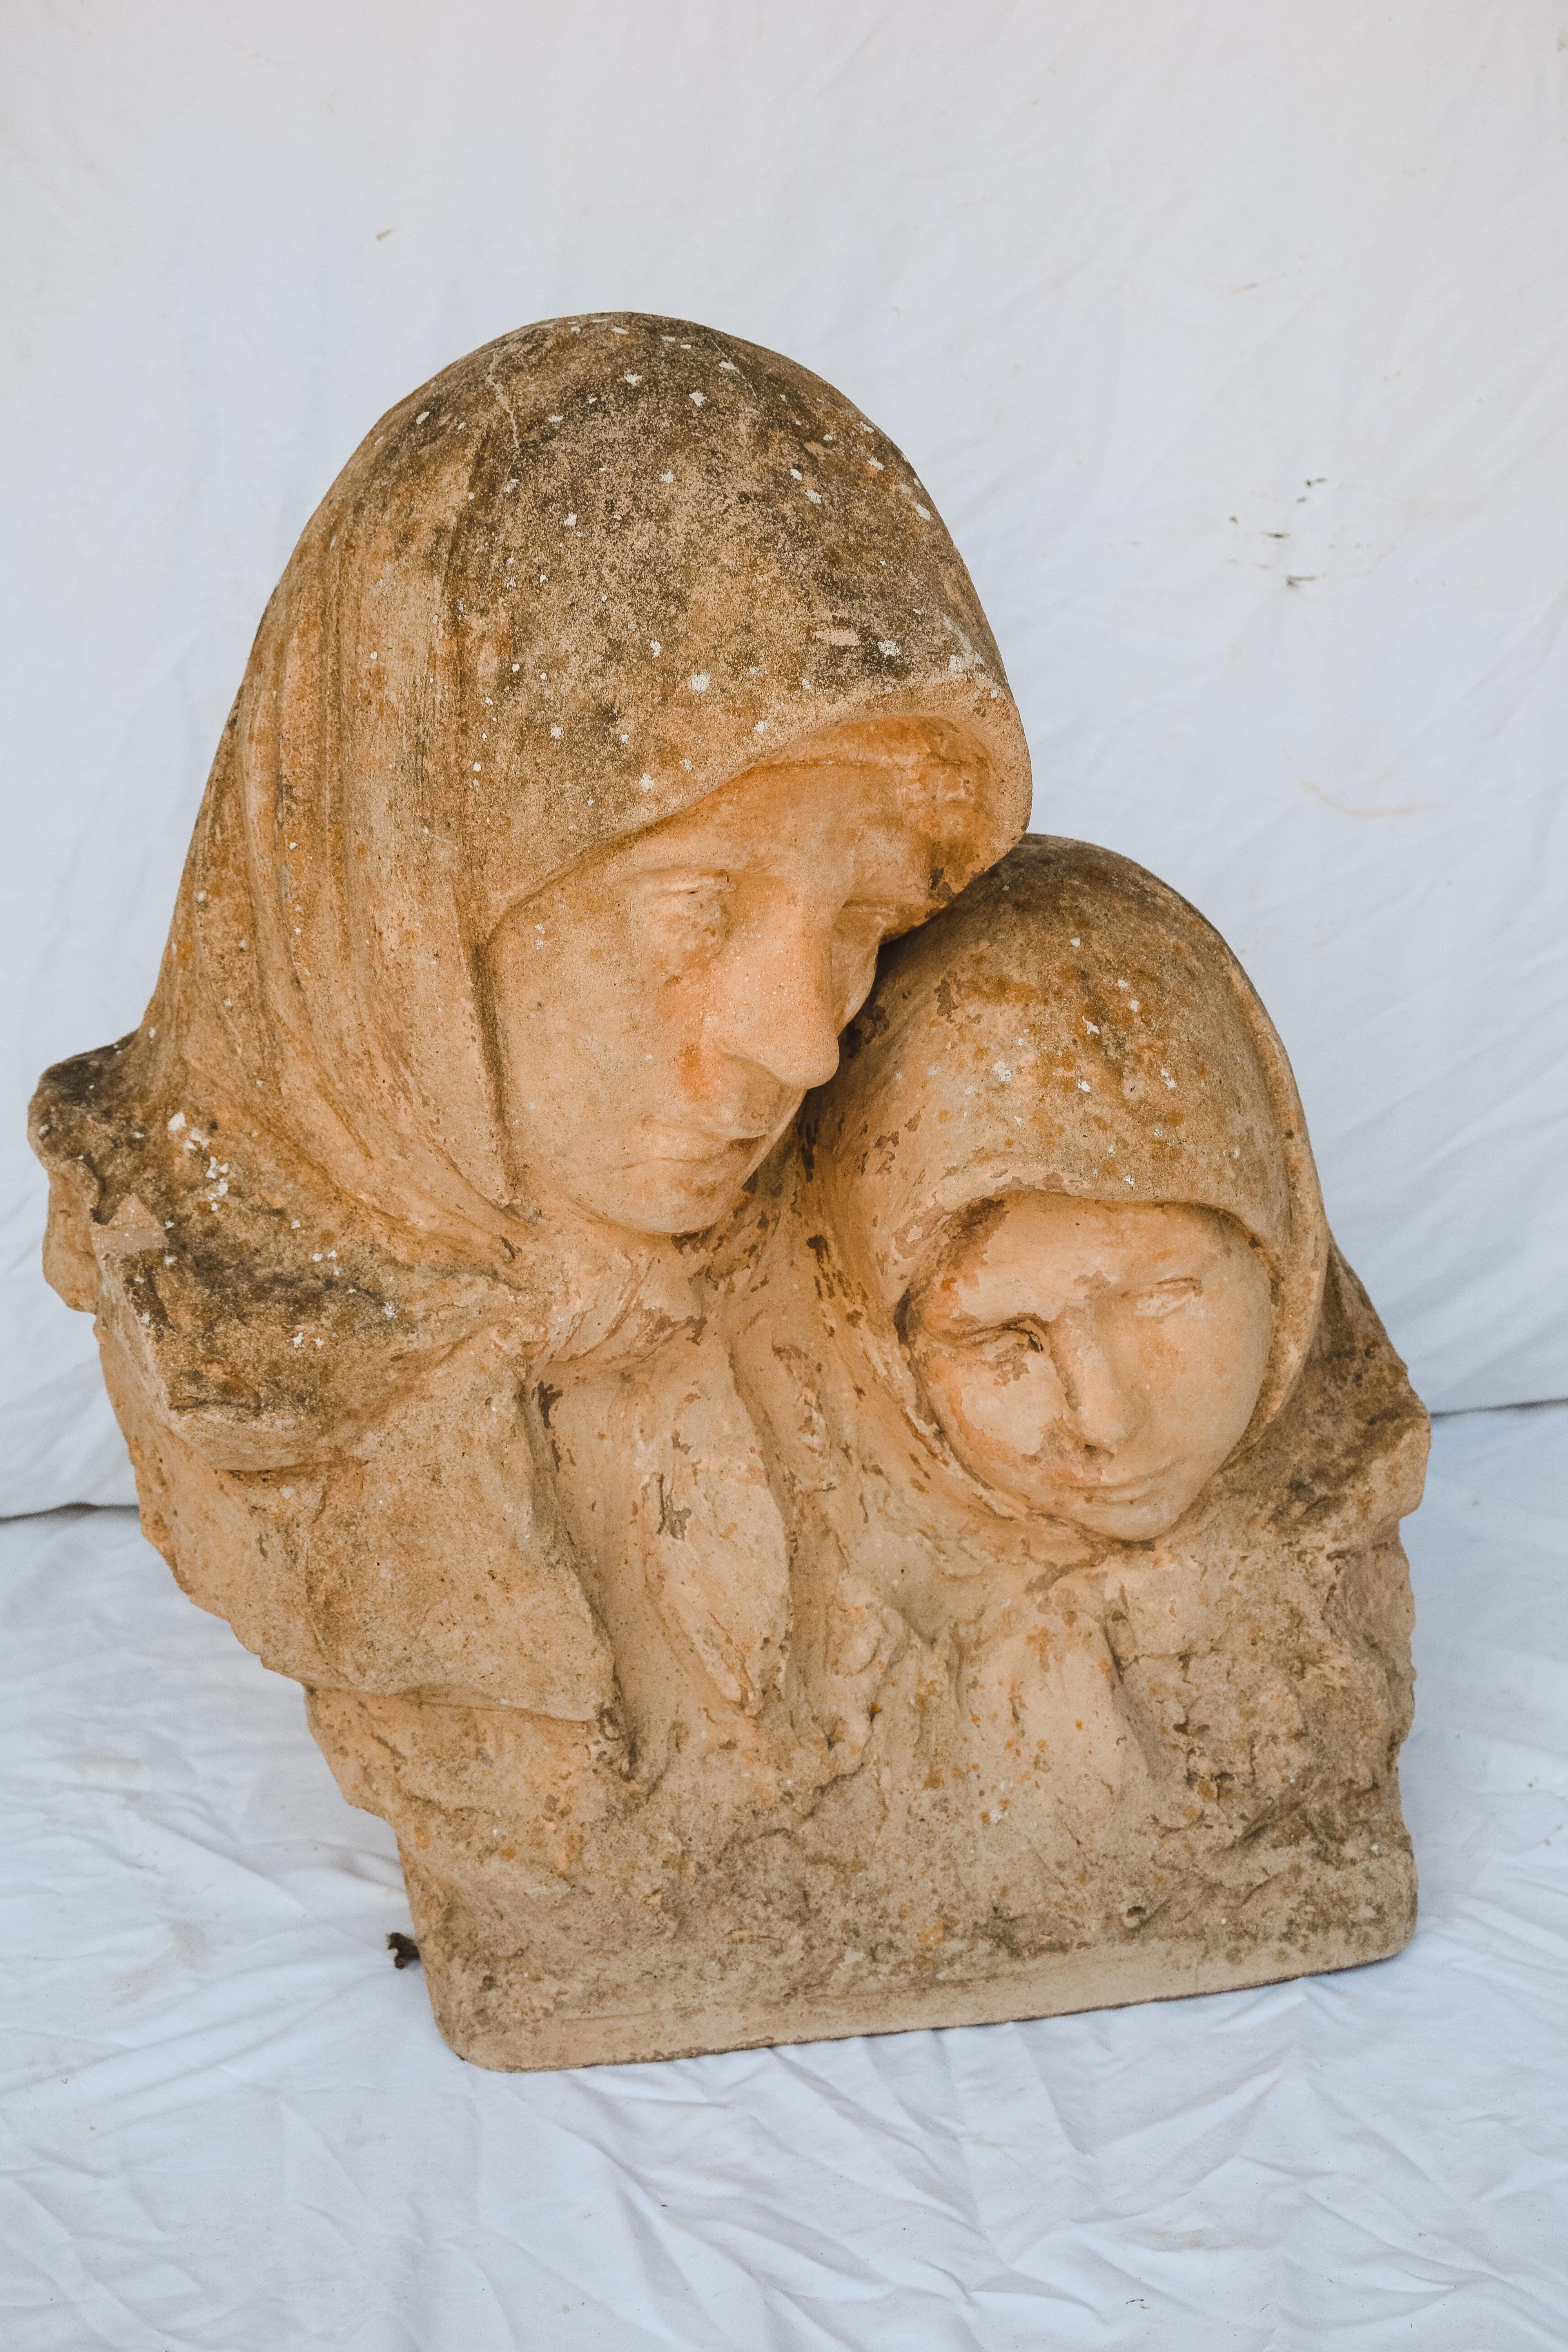 A beautiful Mother and Child statue from France. Placed in a garden or in a prominent spot it is sure to be a conversation piece.